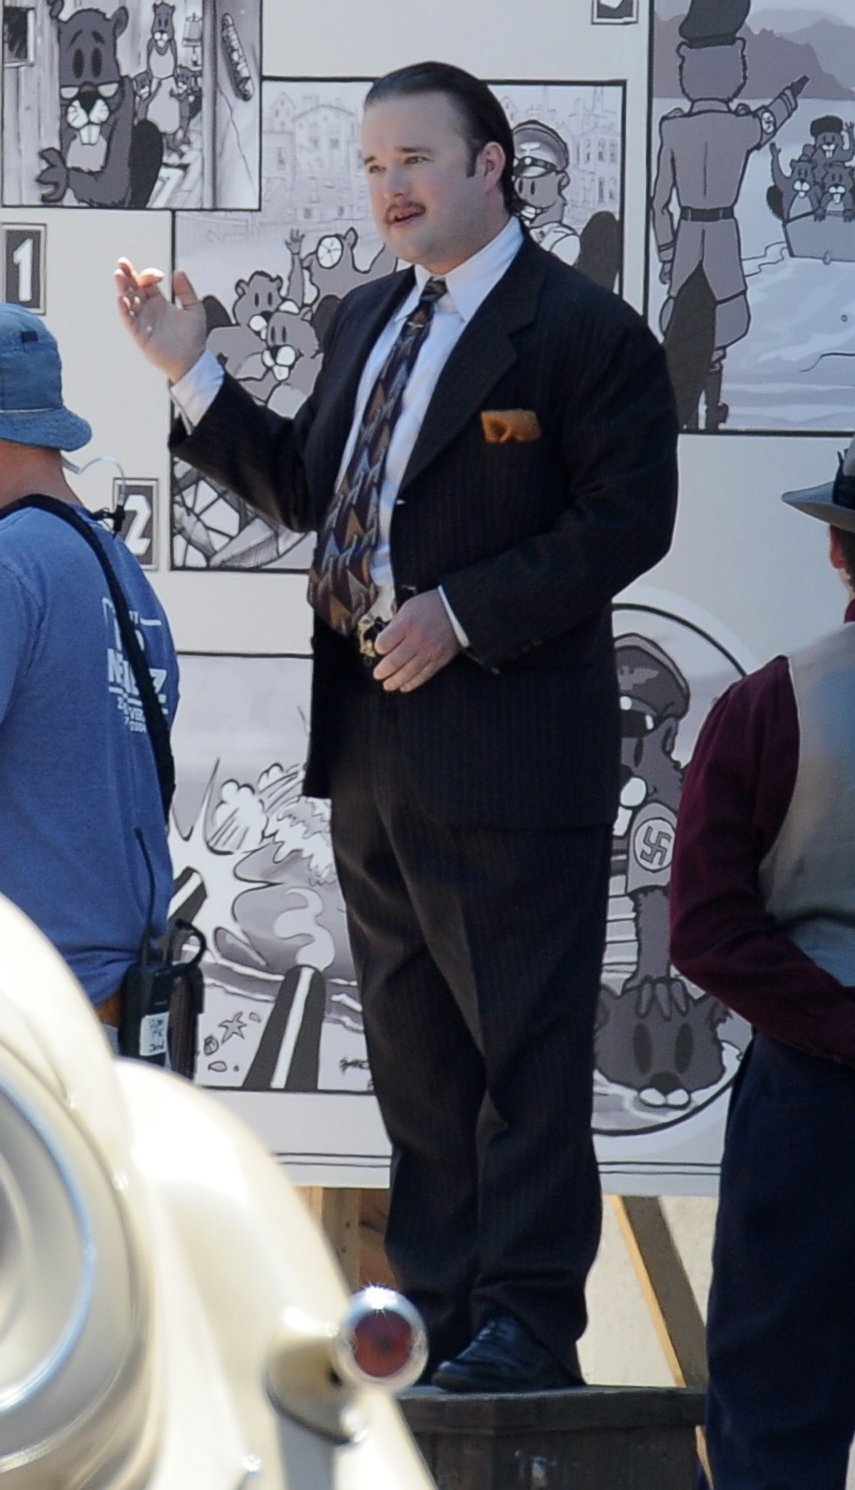 PHOTO: Actor Haley Joel Osment plays a Nazi in the new movie 'Yoga Hosers' filming in downtown Los Angeles, Sept. 9, 2014.